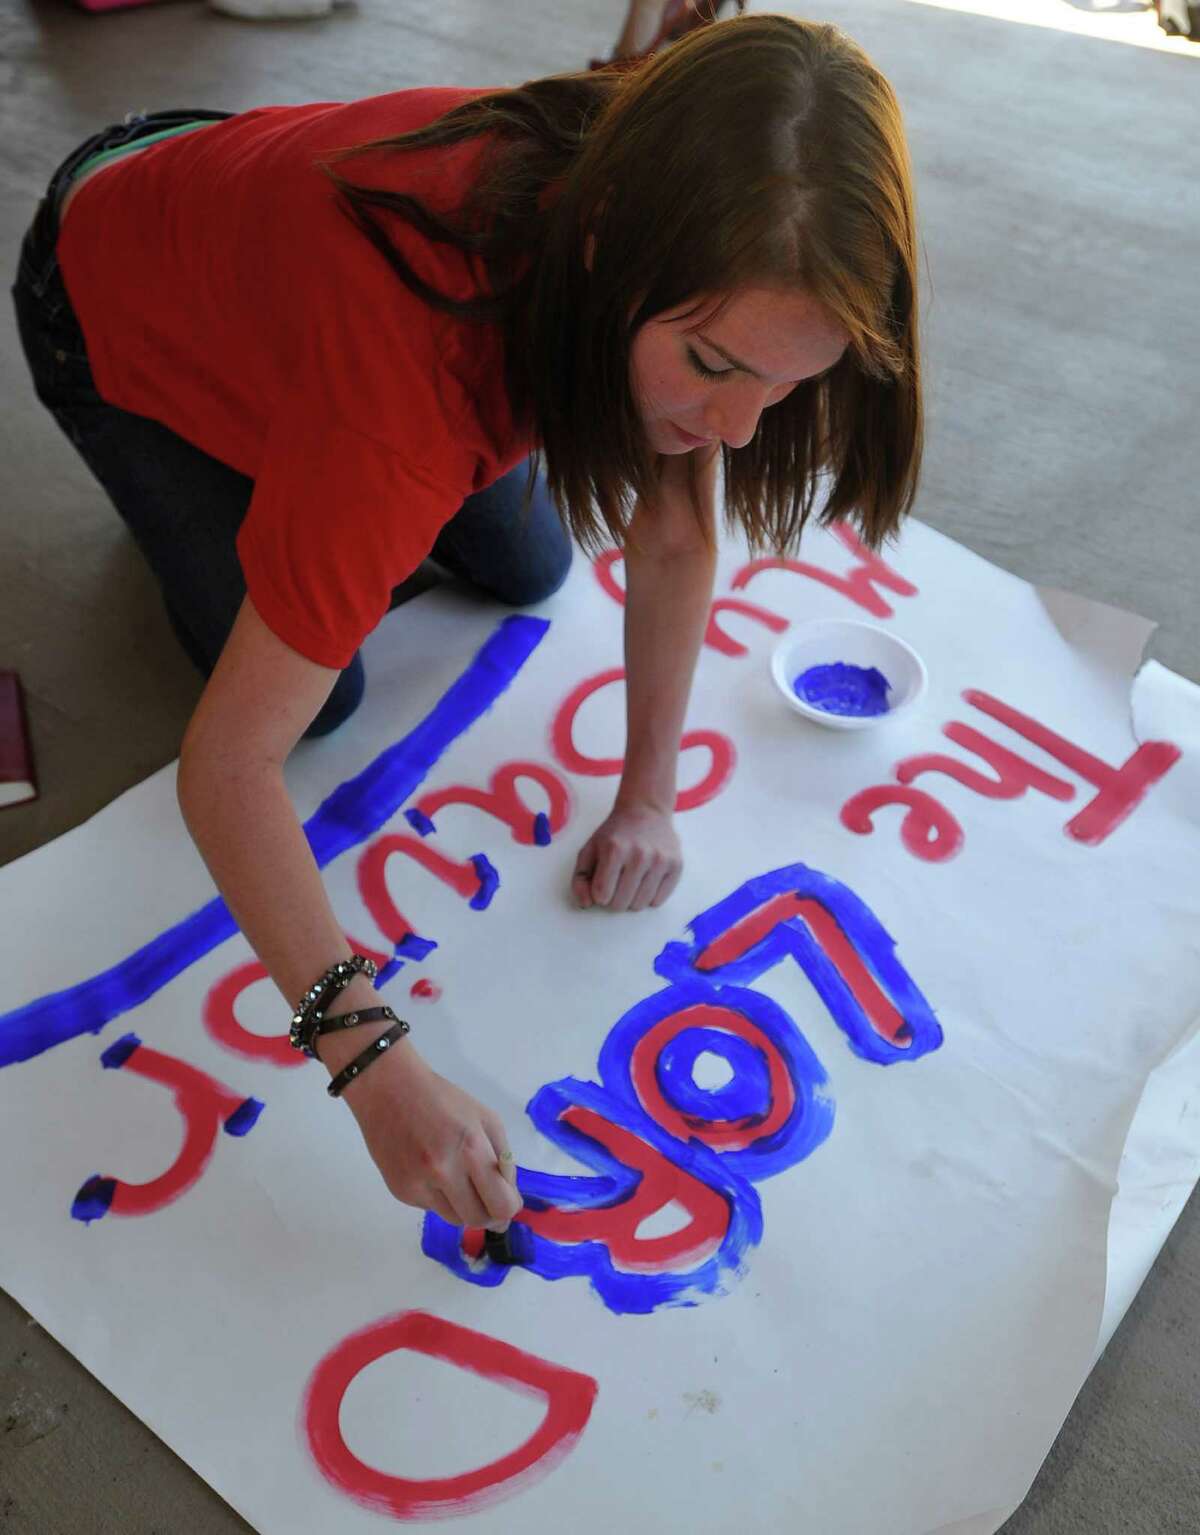 Ashton Lawrence, a cheerleader, enhances her latest piece of work on the patio. Kountze cheerleaders, friends and supportive parents who are standing up for their kids and their beliefs, were making signs and painting car windows Wednesday afternoon that will be seen around Kountze in support of the cheerleaders who were told they could not put scripture on their football signs. Each game this season, the Kountze cheerleaders have made Christian-themed run-through signs for the football players. The signs, which featured scripture verses, went viral and have now been stopped by the school district's leaders who were told by a group the signs were offensive and against the separation of church and state. Dave Ryan/The Enterprise